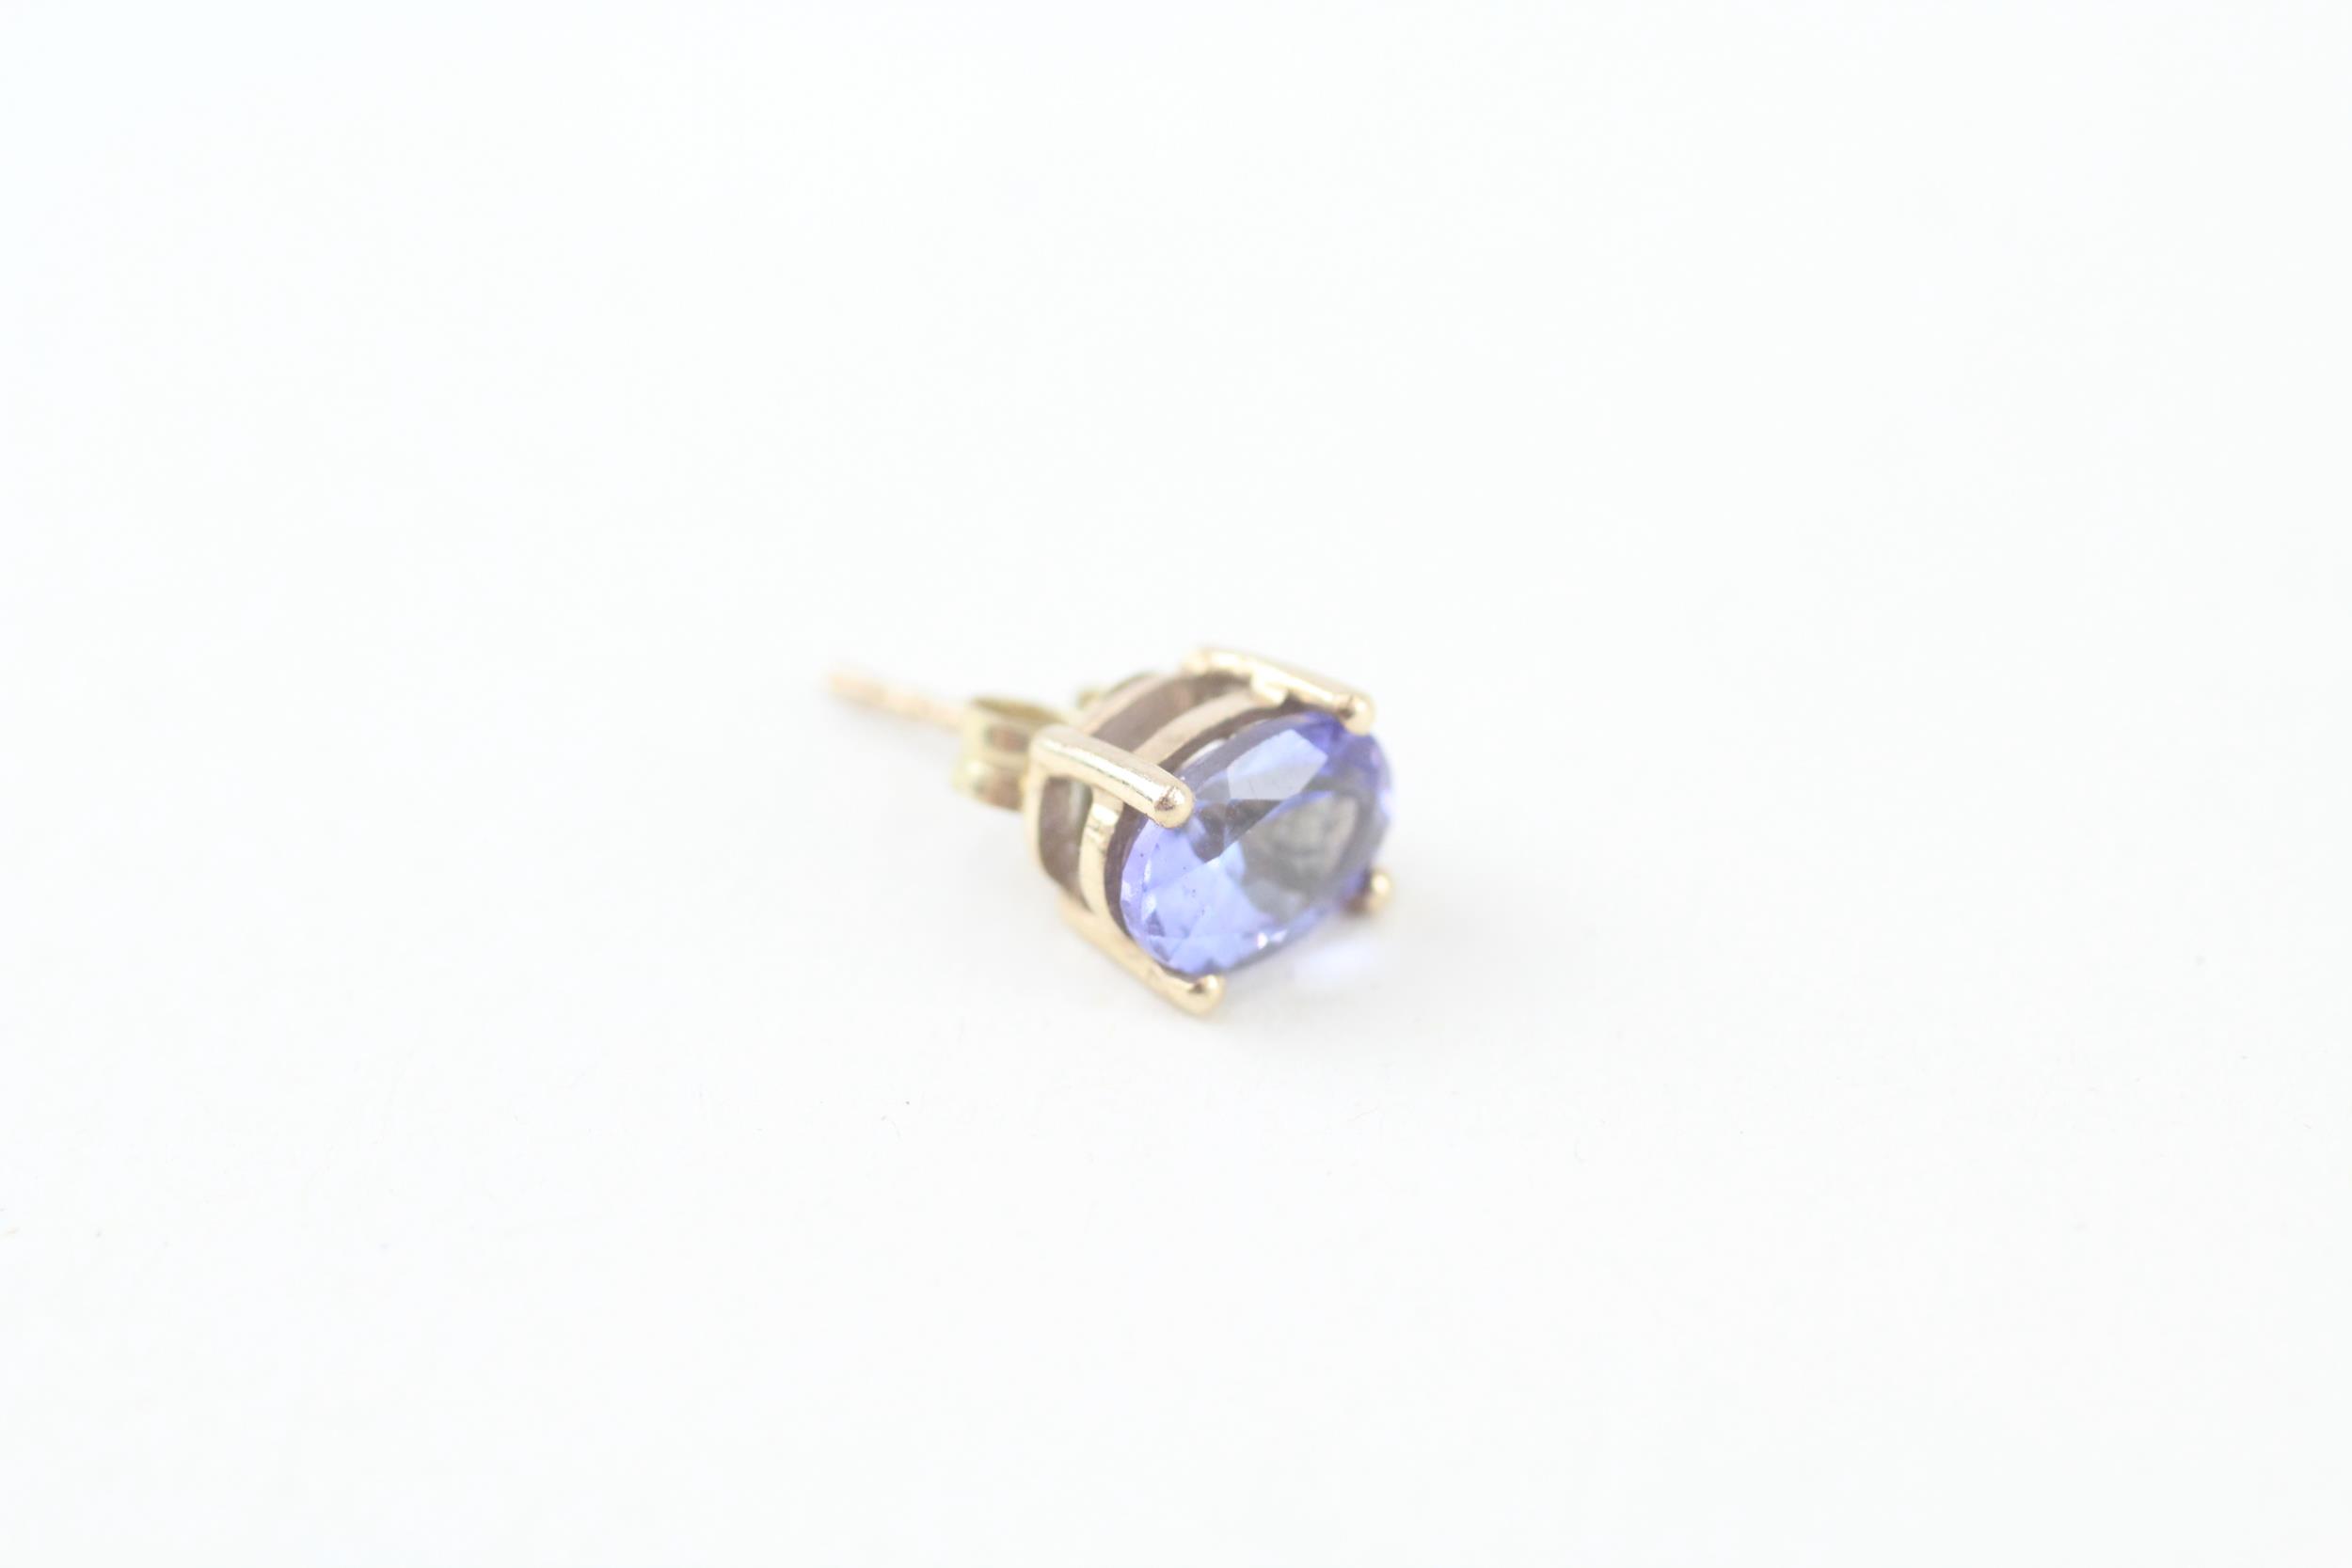 9ct gold oval cut tanzanite stud earrings in a four claw setting (1.3g) - Image 2 of 4